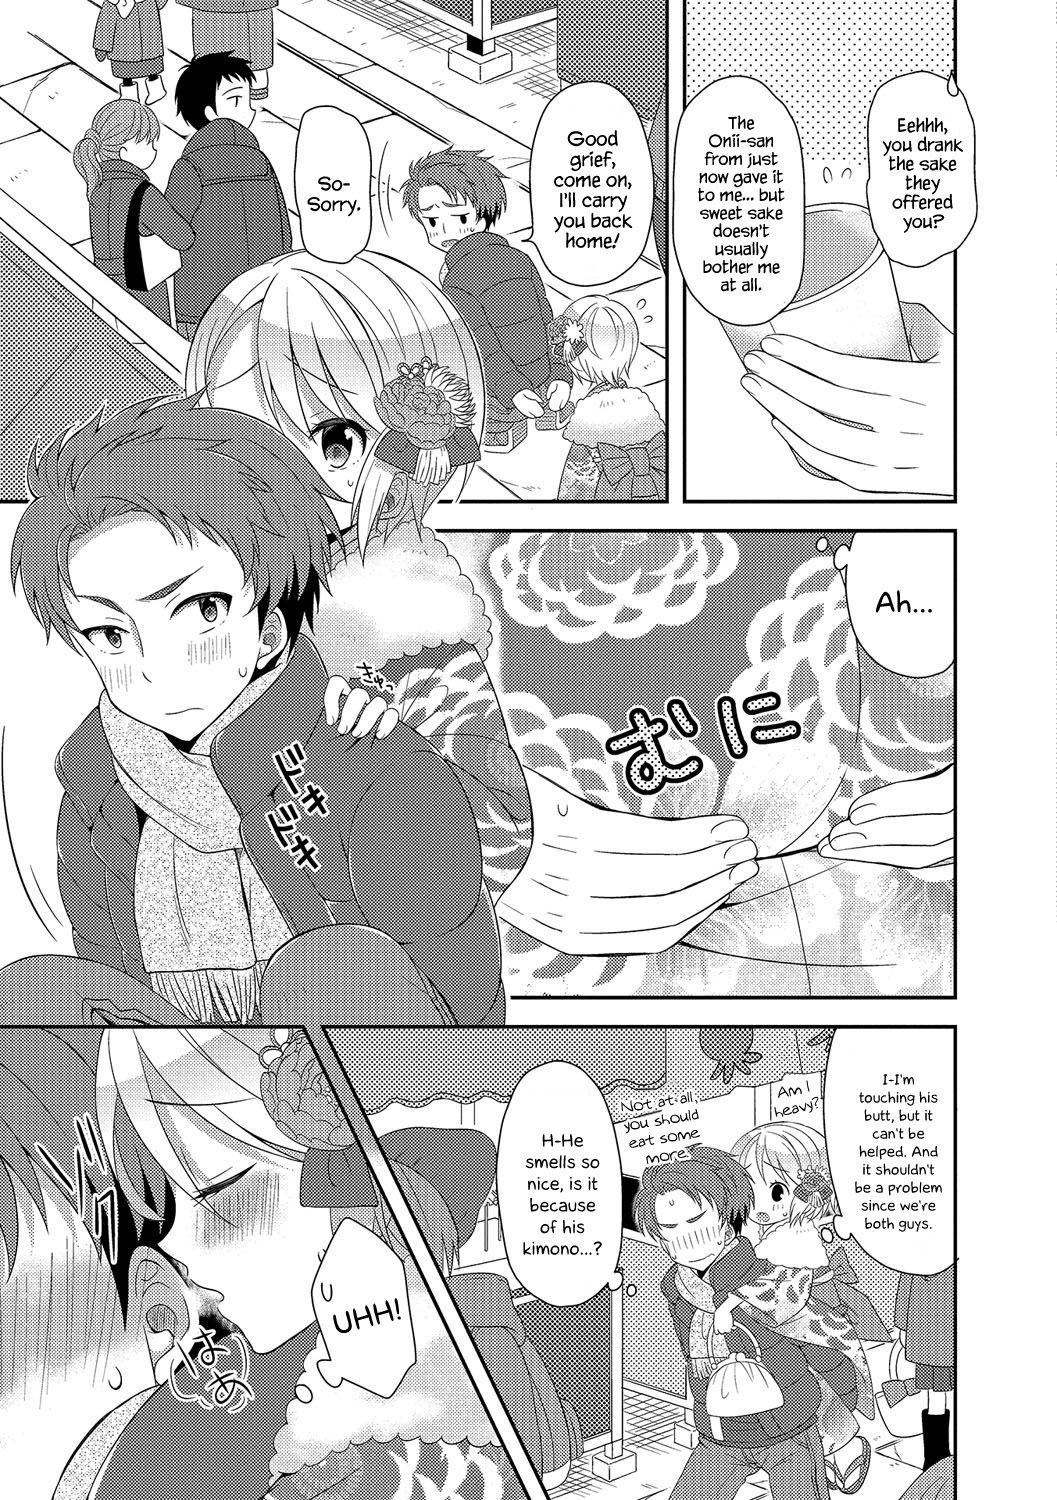 Sofa Hatsumoude no Ohimesama | The Princess of the New Year Visit Foreplay - Page 3